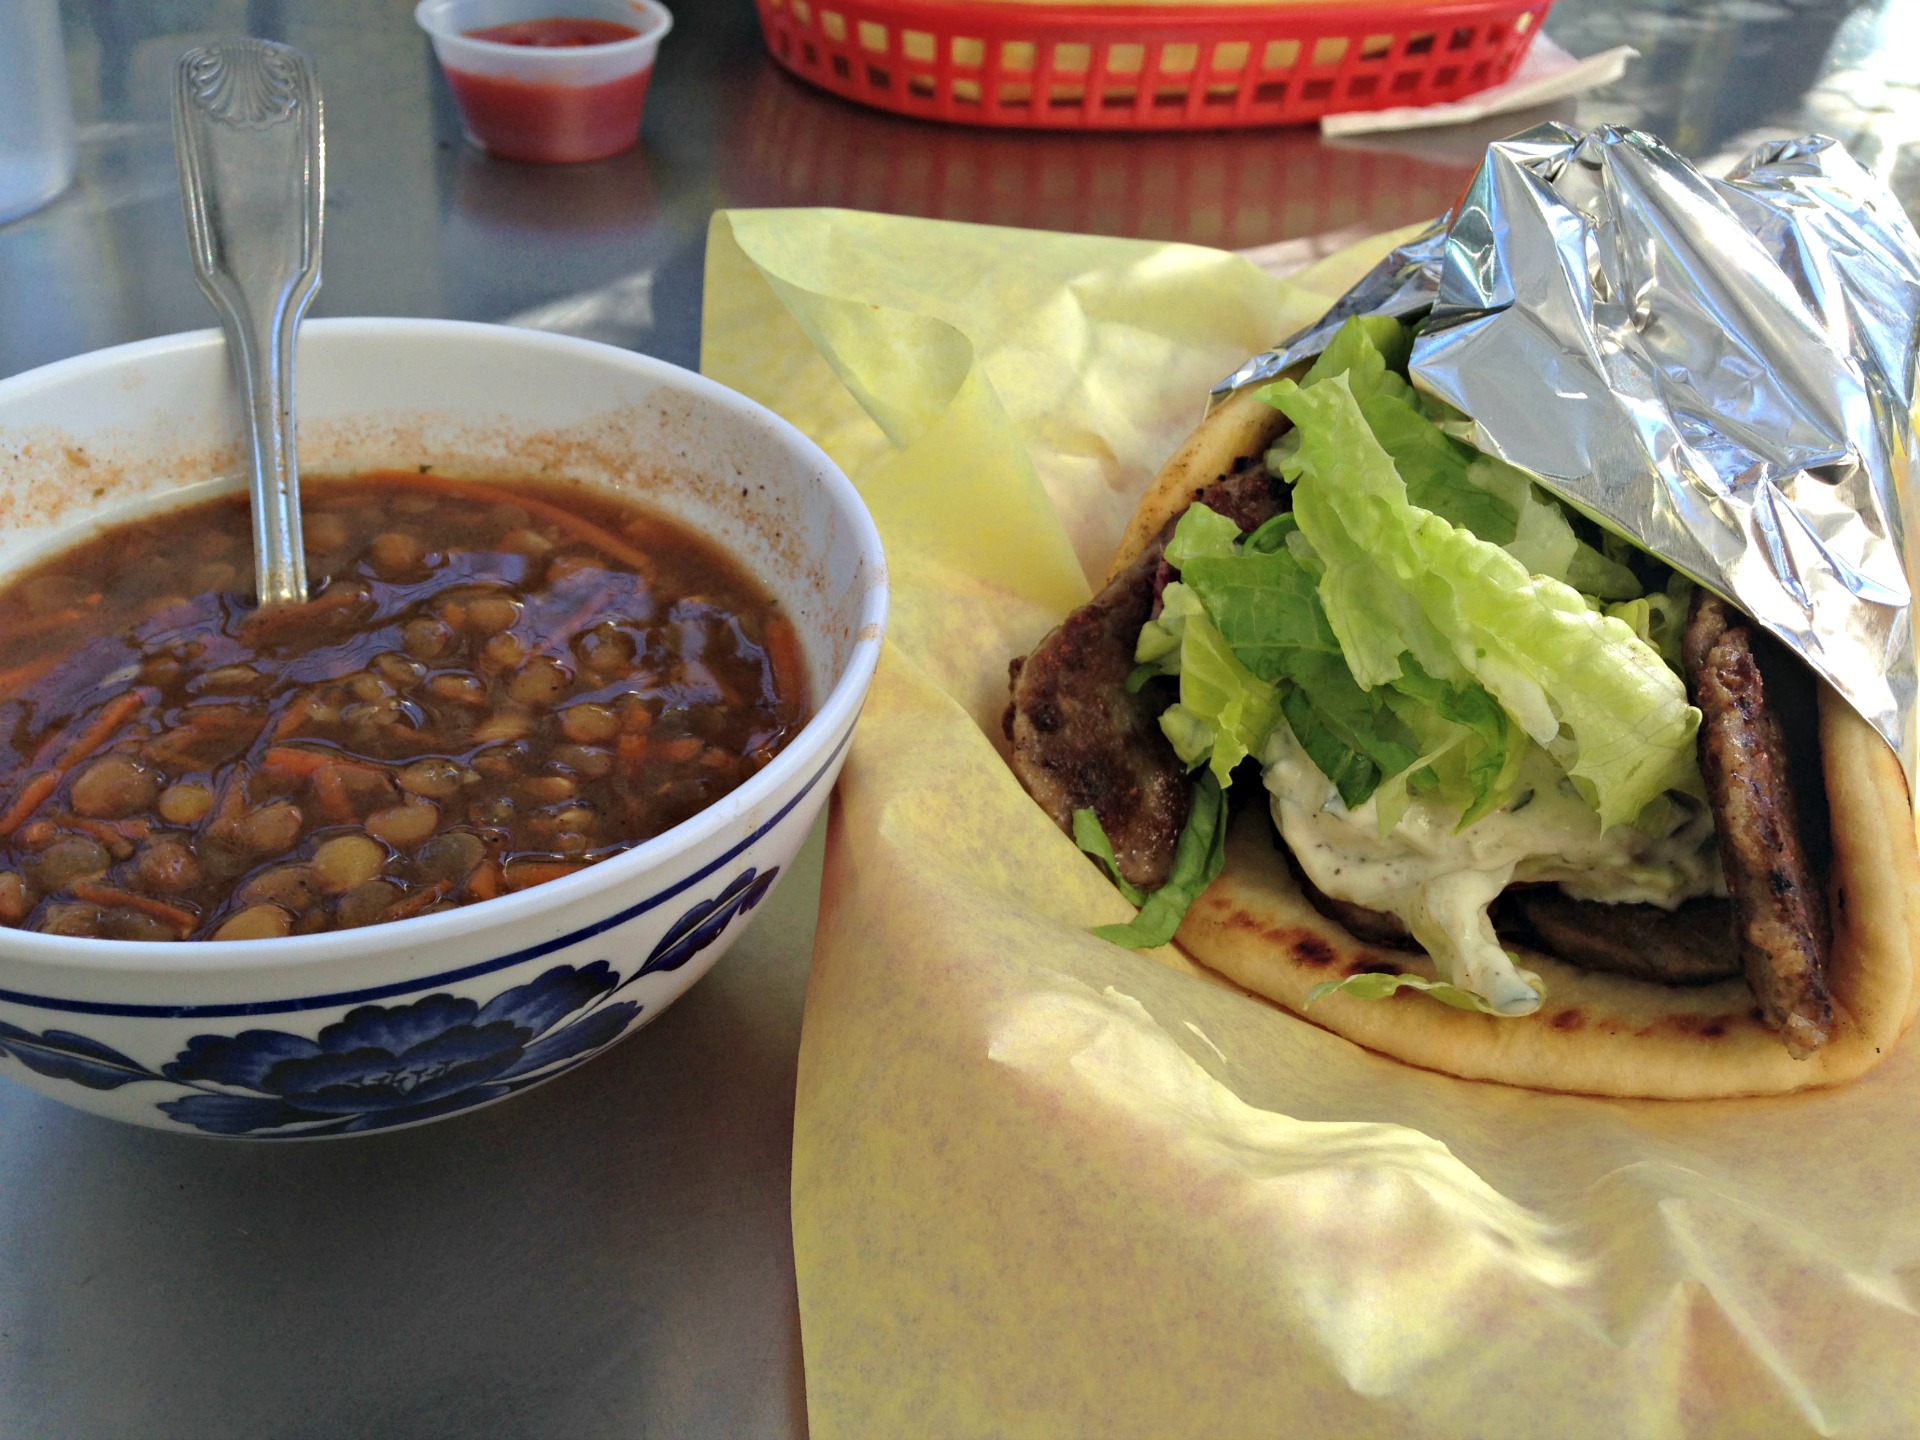 A lamb and beef gyro (plus free soup) at Wally's Cafe.